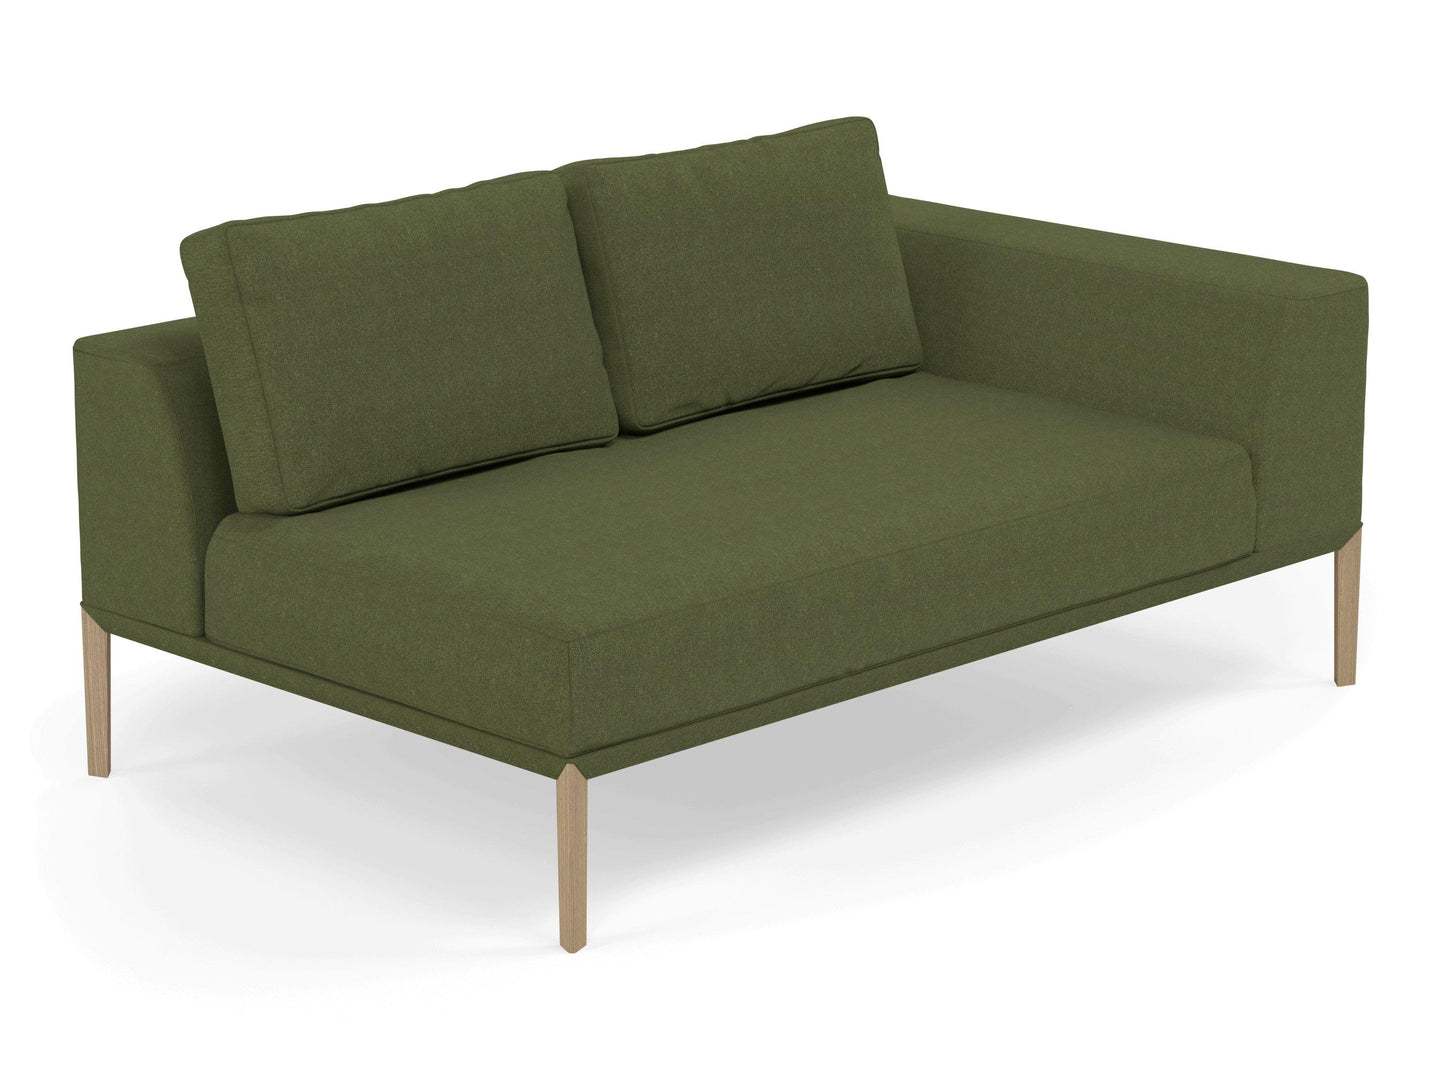 Modern 2 Seater Chaise Lounge Style Sofa with Left Armrest in Seaweed Green Fabric-Distinct Designs (London) Ltd